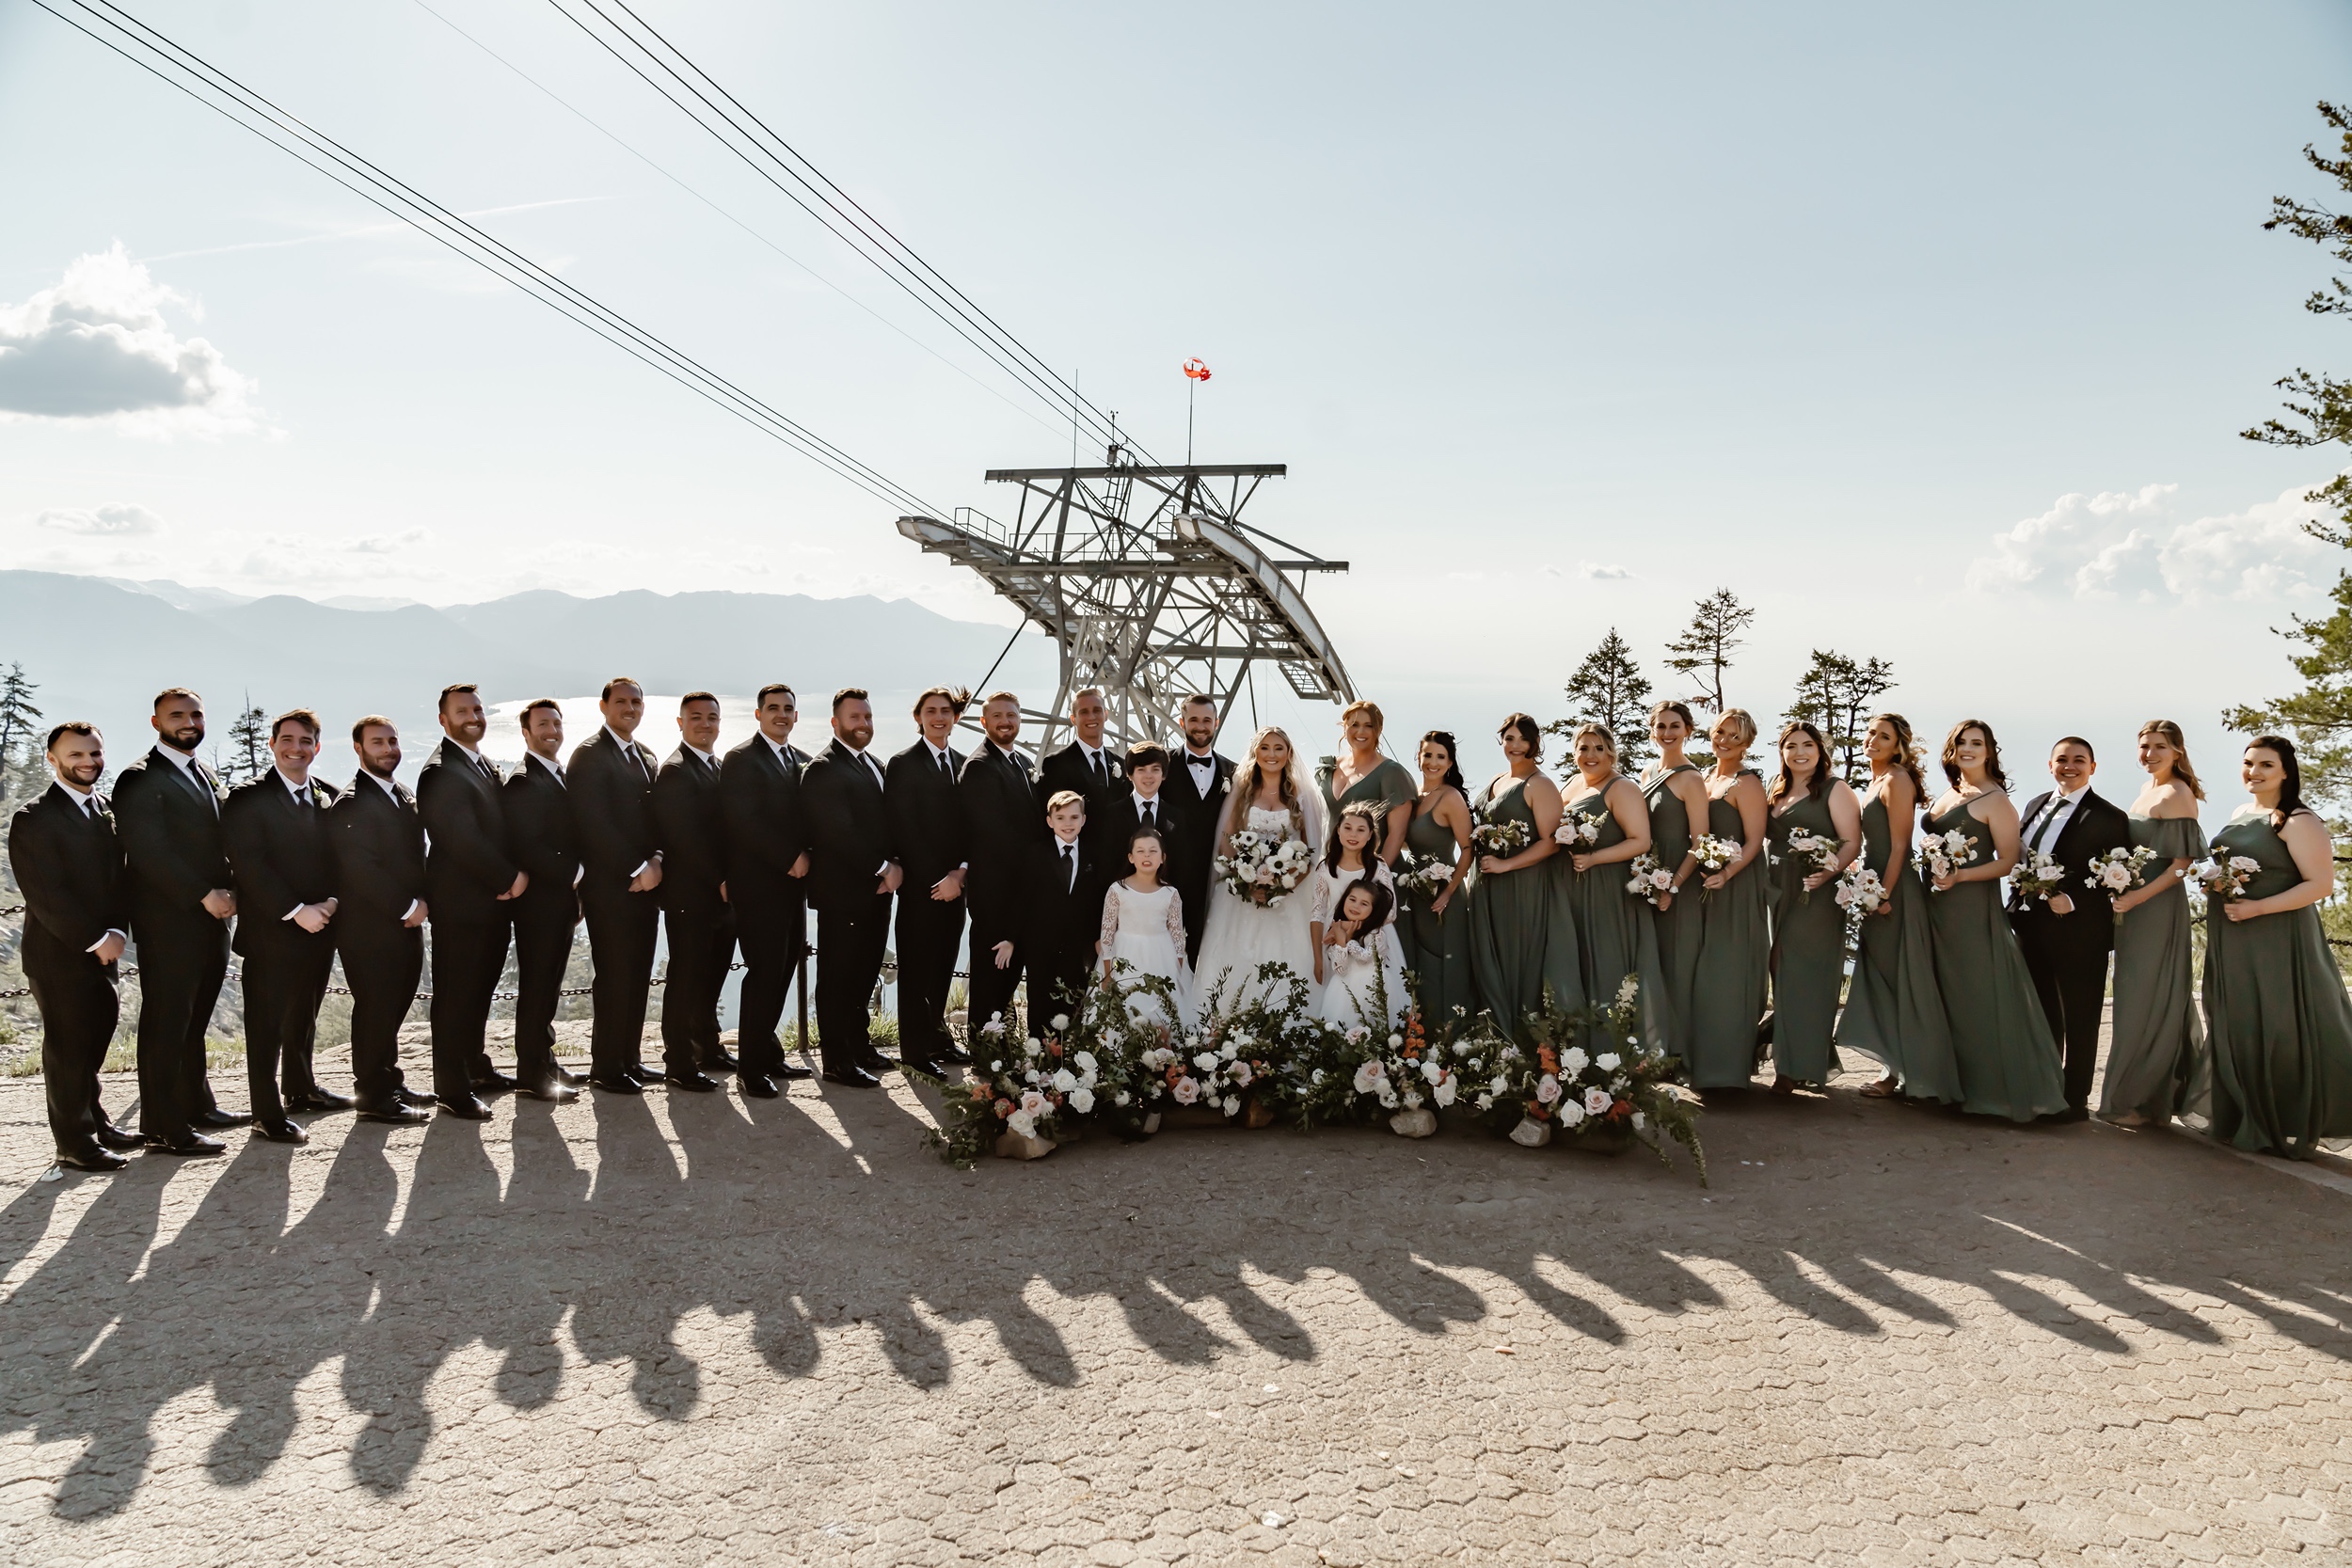 Full wedding party in front of gondola at Heavenly wedding